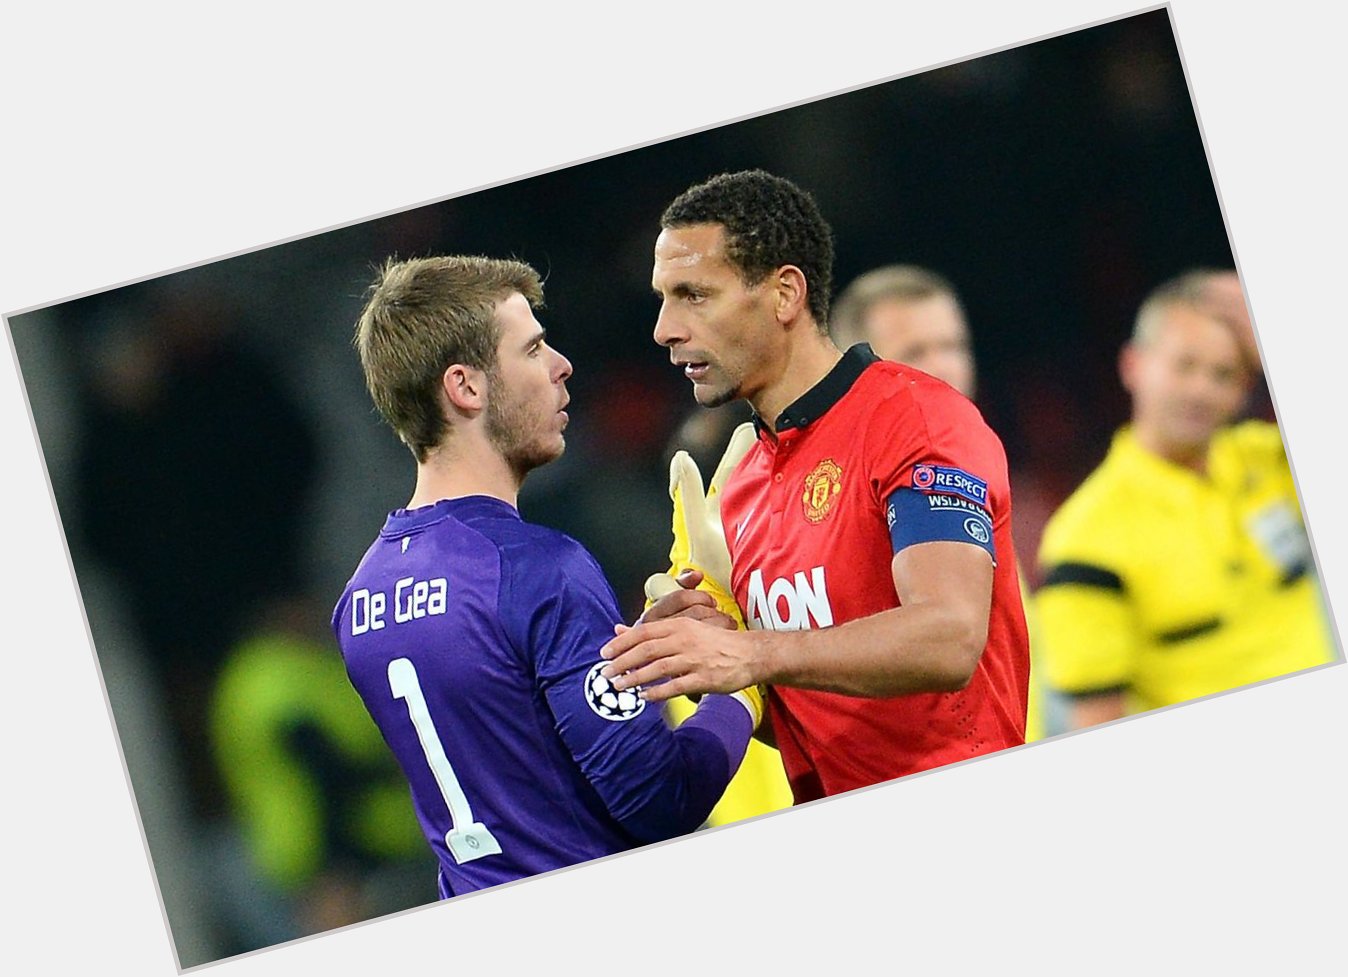 Happy birthday to David De Gea and Rio Ferdinand! The keeper turns 25 while his former teammate is 37. 